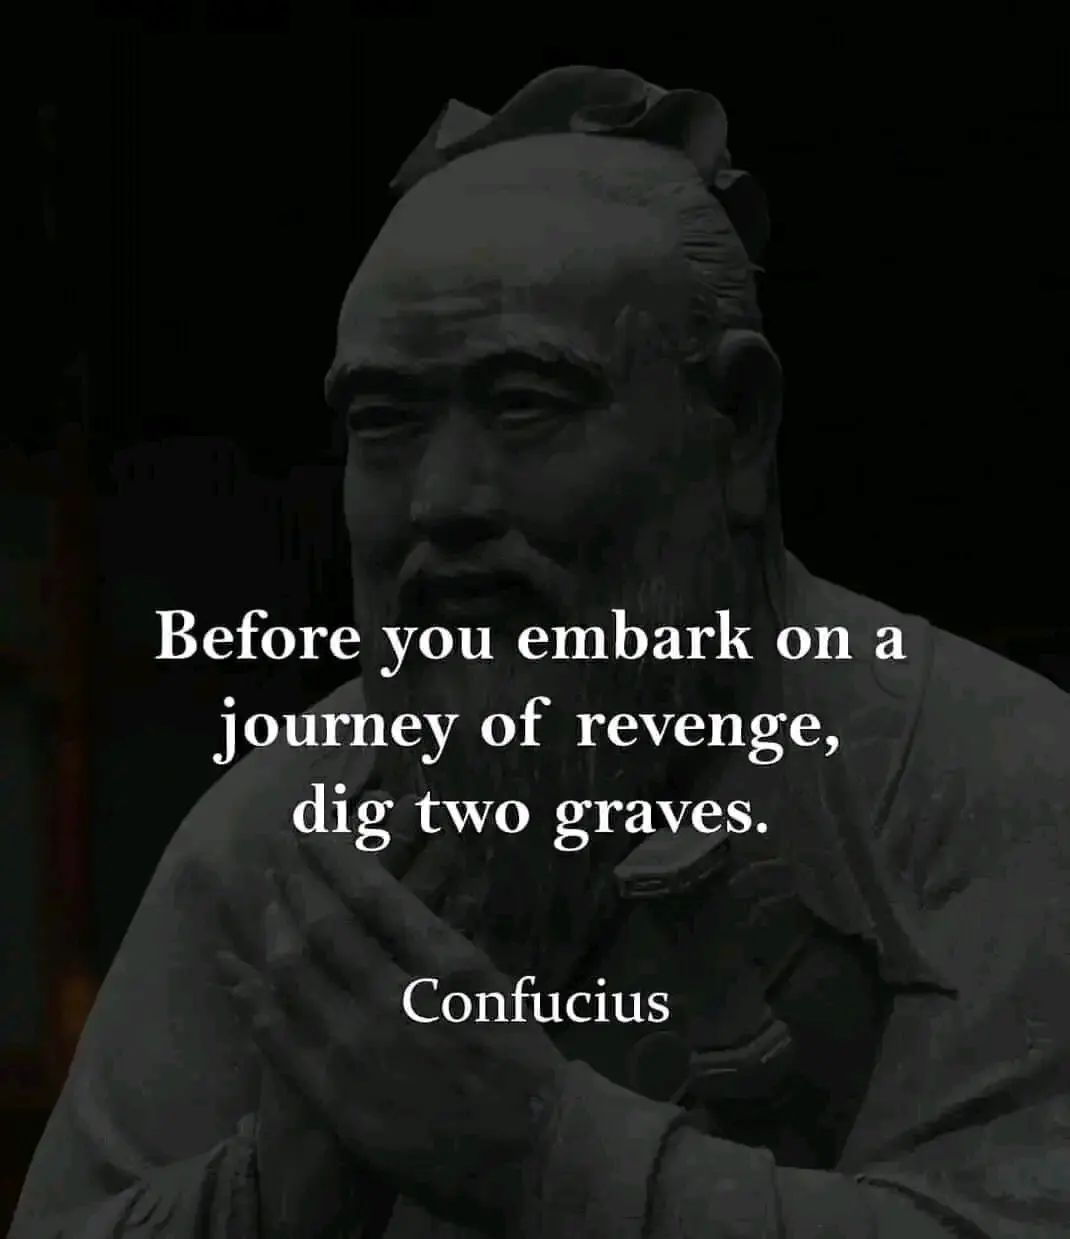 Before you embark on a journey of revenge, dig two graves. Confucius